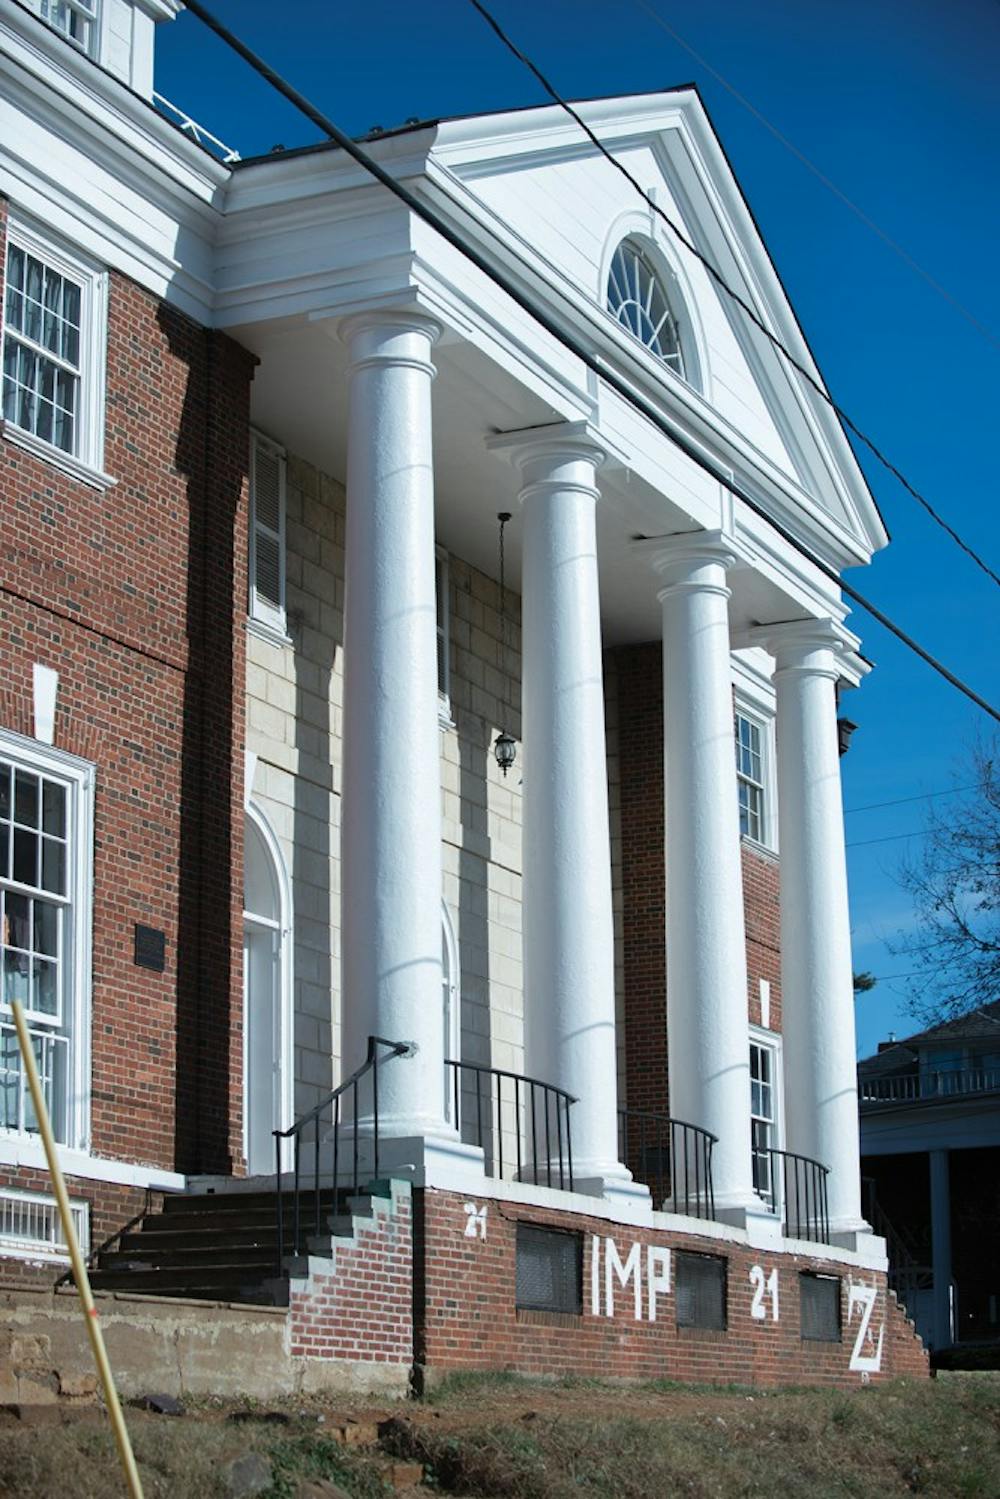 <p>The Phi Kappa Psi fraternity house</p>